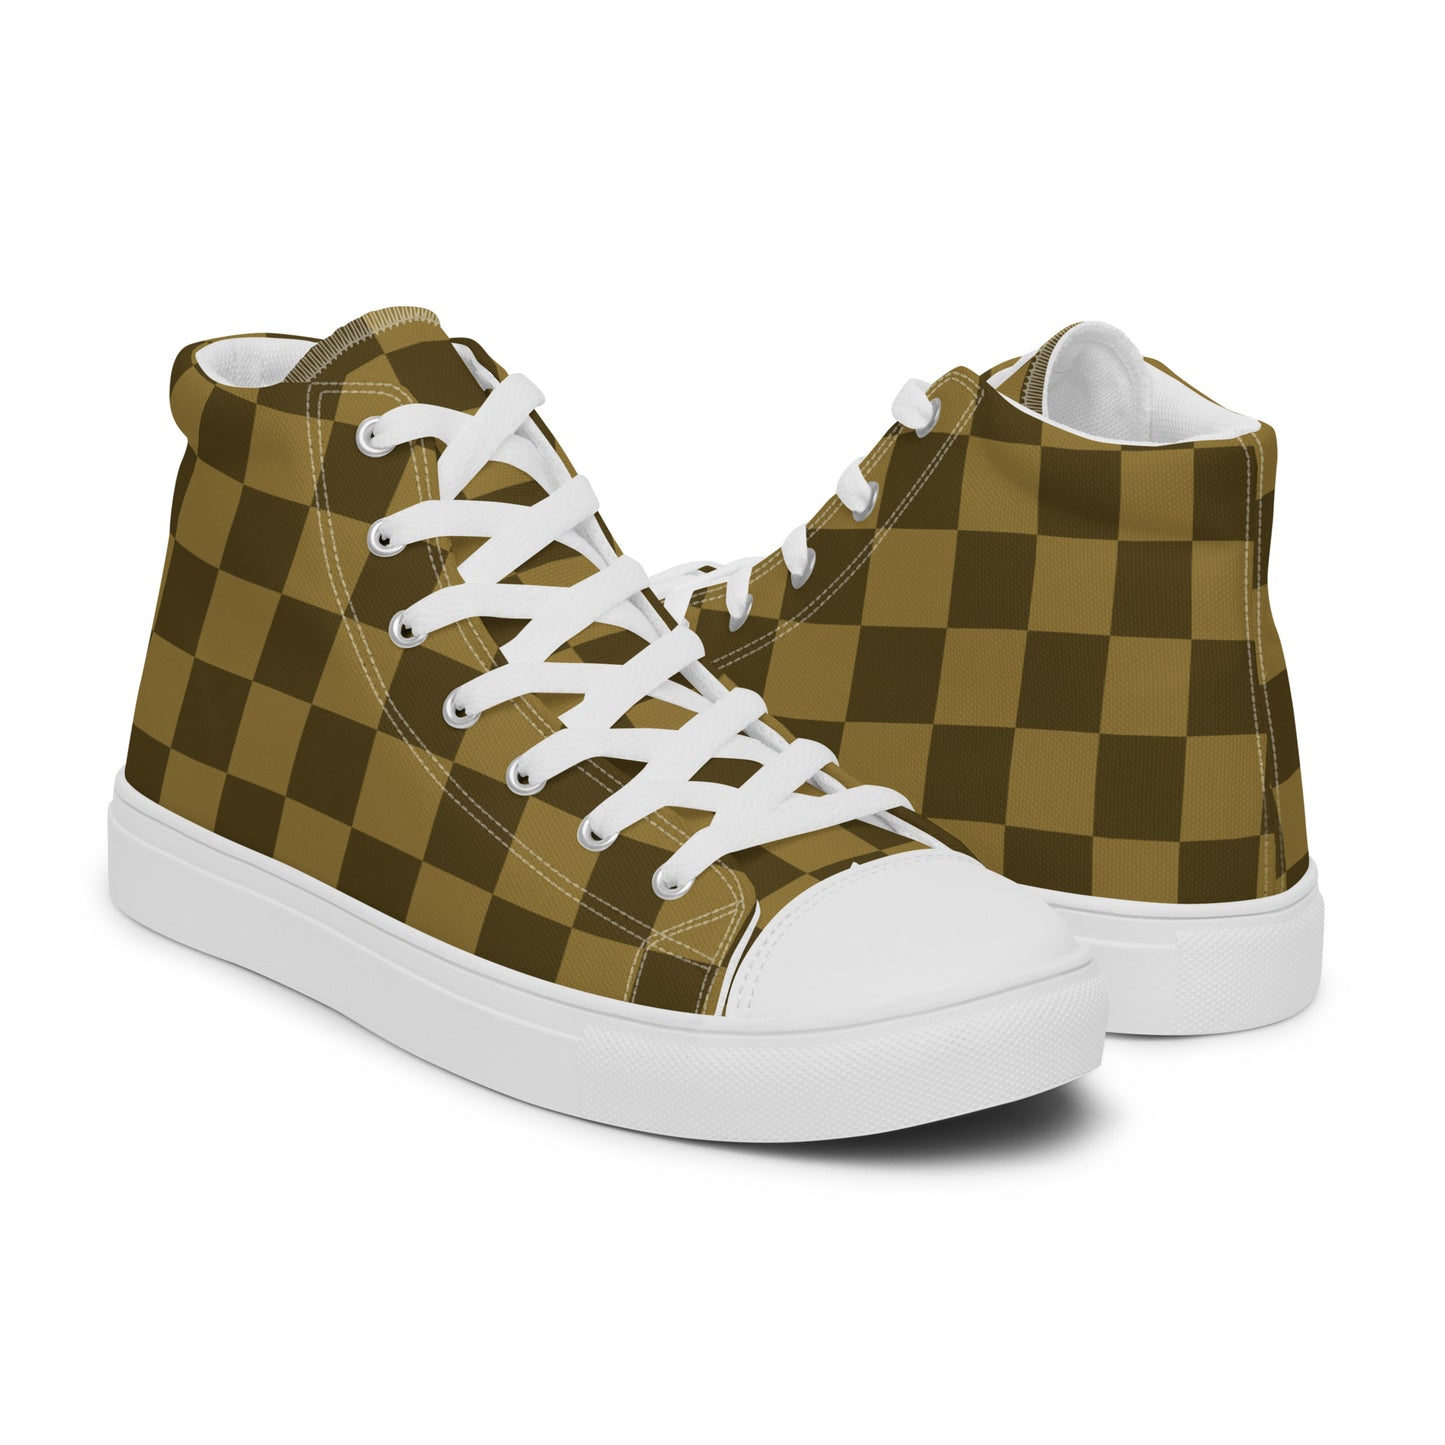 Wempy Dyocta Koto Signature Casual - Sustainably Made Men’s high top canvas shoes